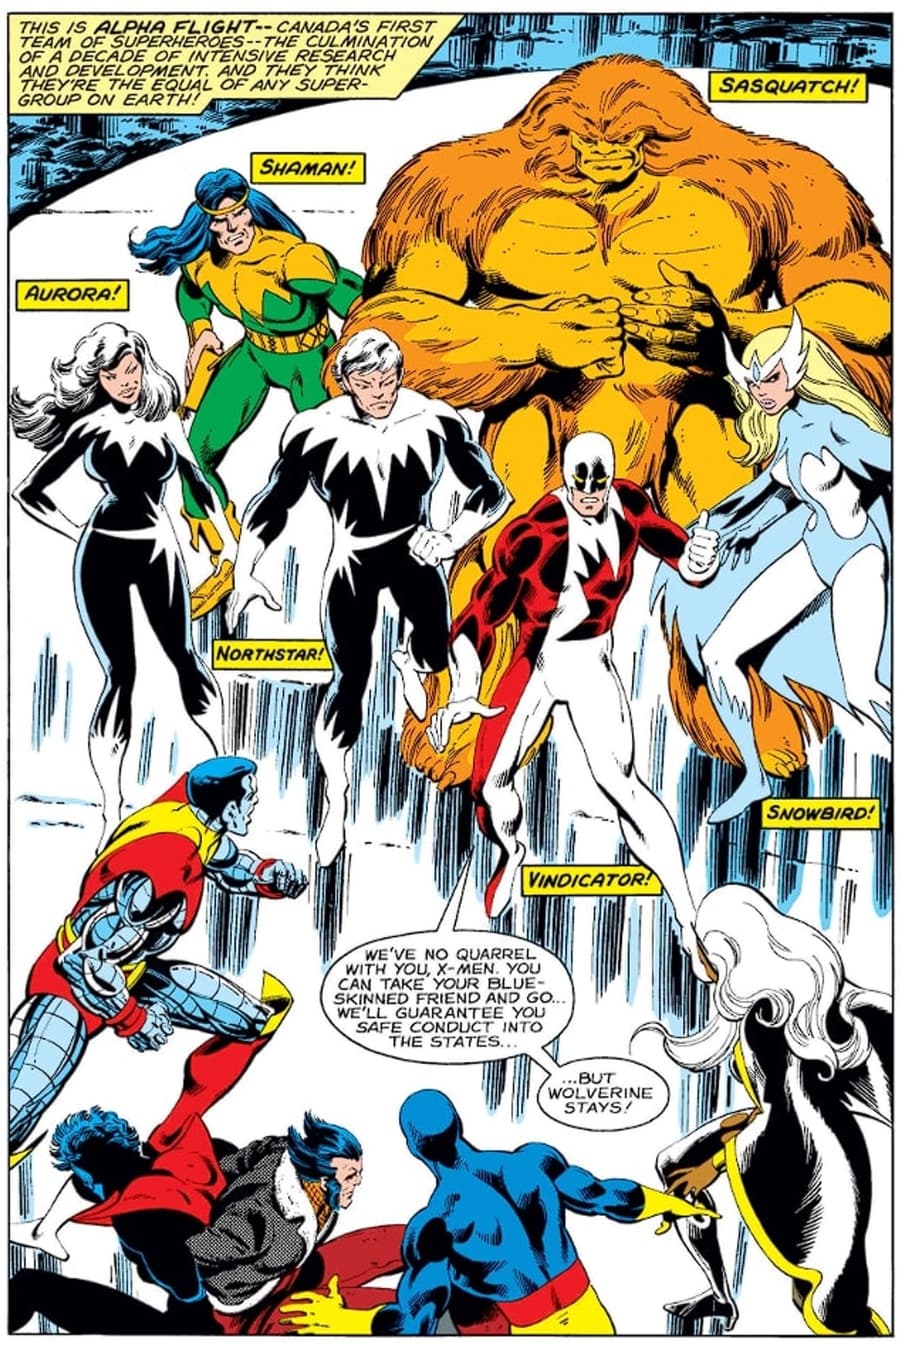 UNCANNY X-MEN (1963) #121 page by Chris Claremont and John Byrne